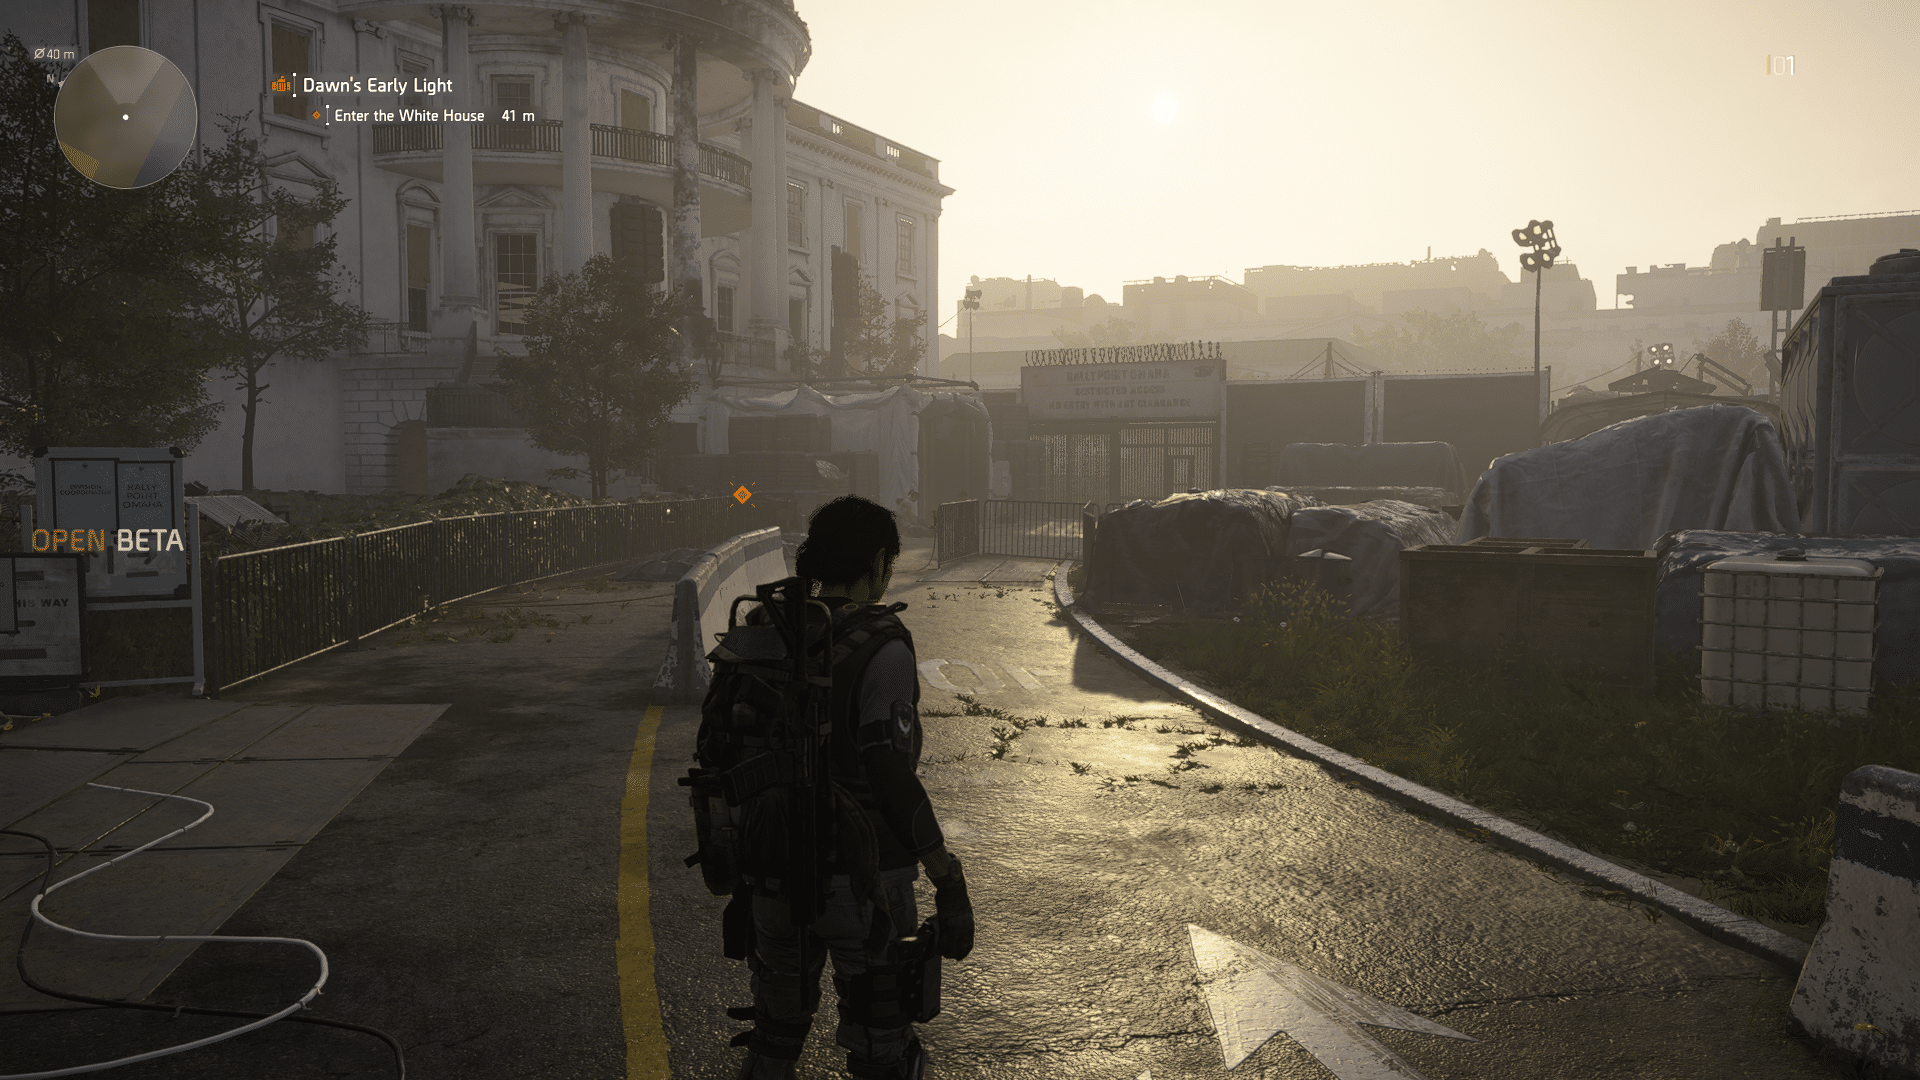 TheDivision2 3 3 2019 6 19 14 PM 593